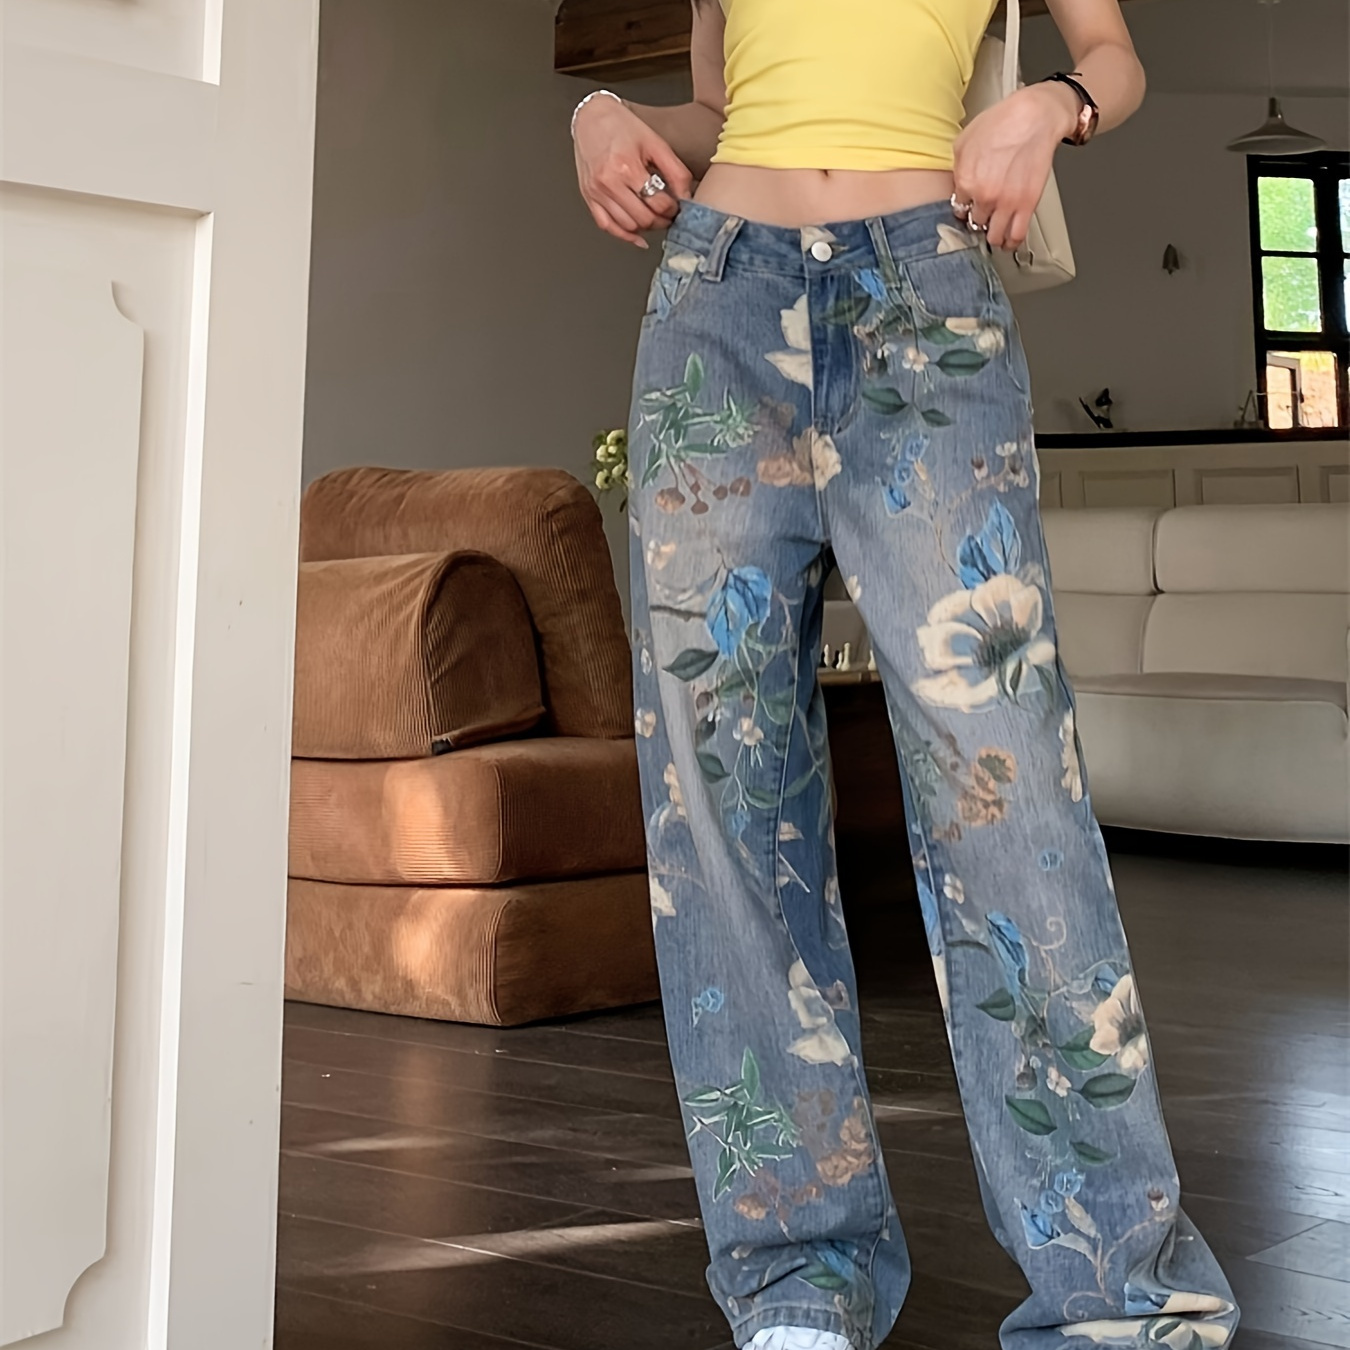 

Women's Floral Print High-waist Jeans, Vintage Style Straight-leg Denim Pants, Casual Retro Flower Patterned Trousers For Streetwear